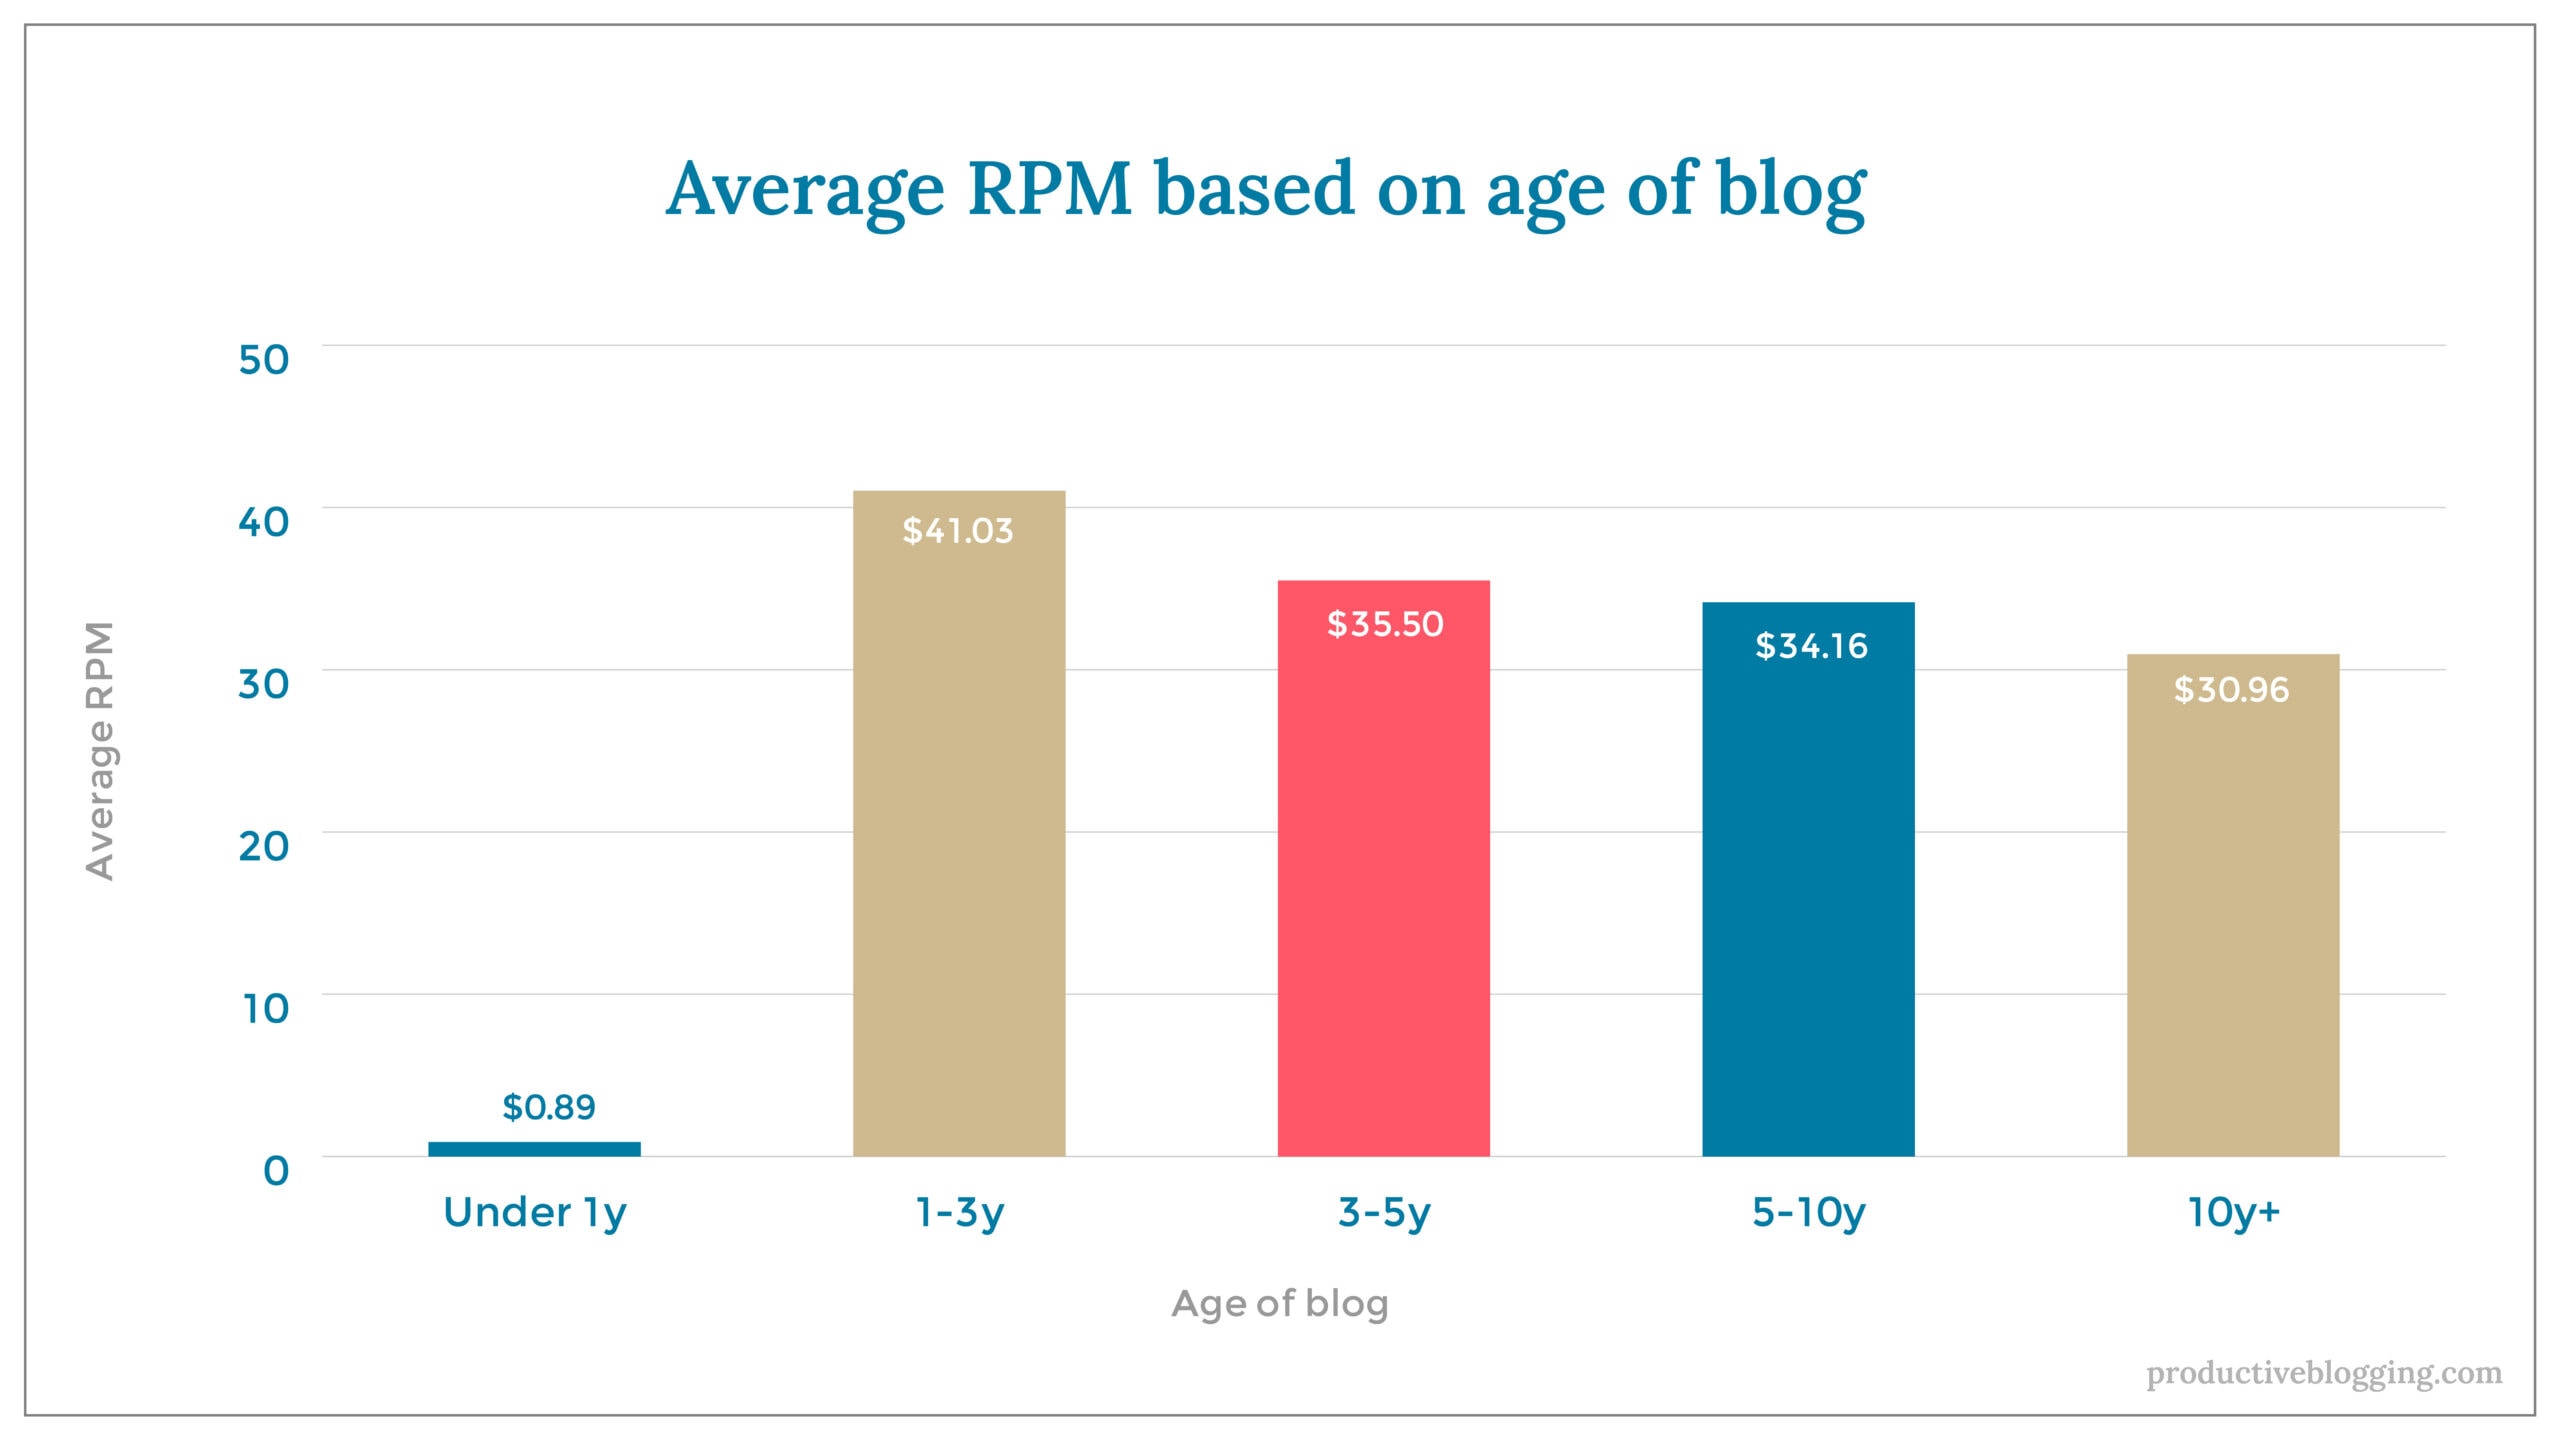 Average RPM based on age of blogX axis: Age of blogY axis: Average RPMUnder 1y 	$0.891-3y 		$41.033-5y		$35.505-10y 		$34.1610y+ 		$30.96